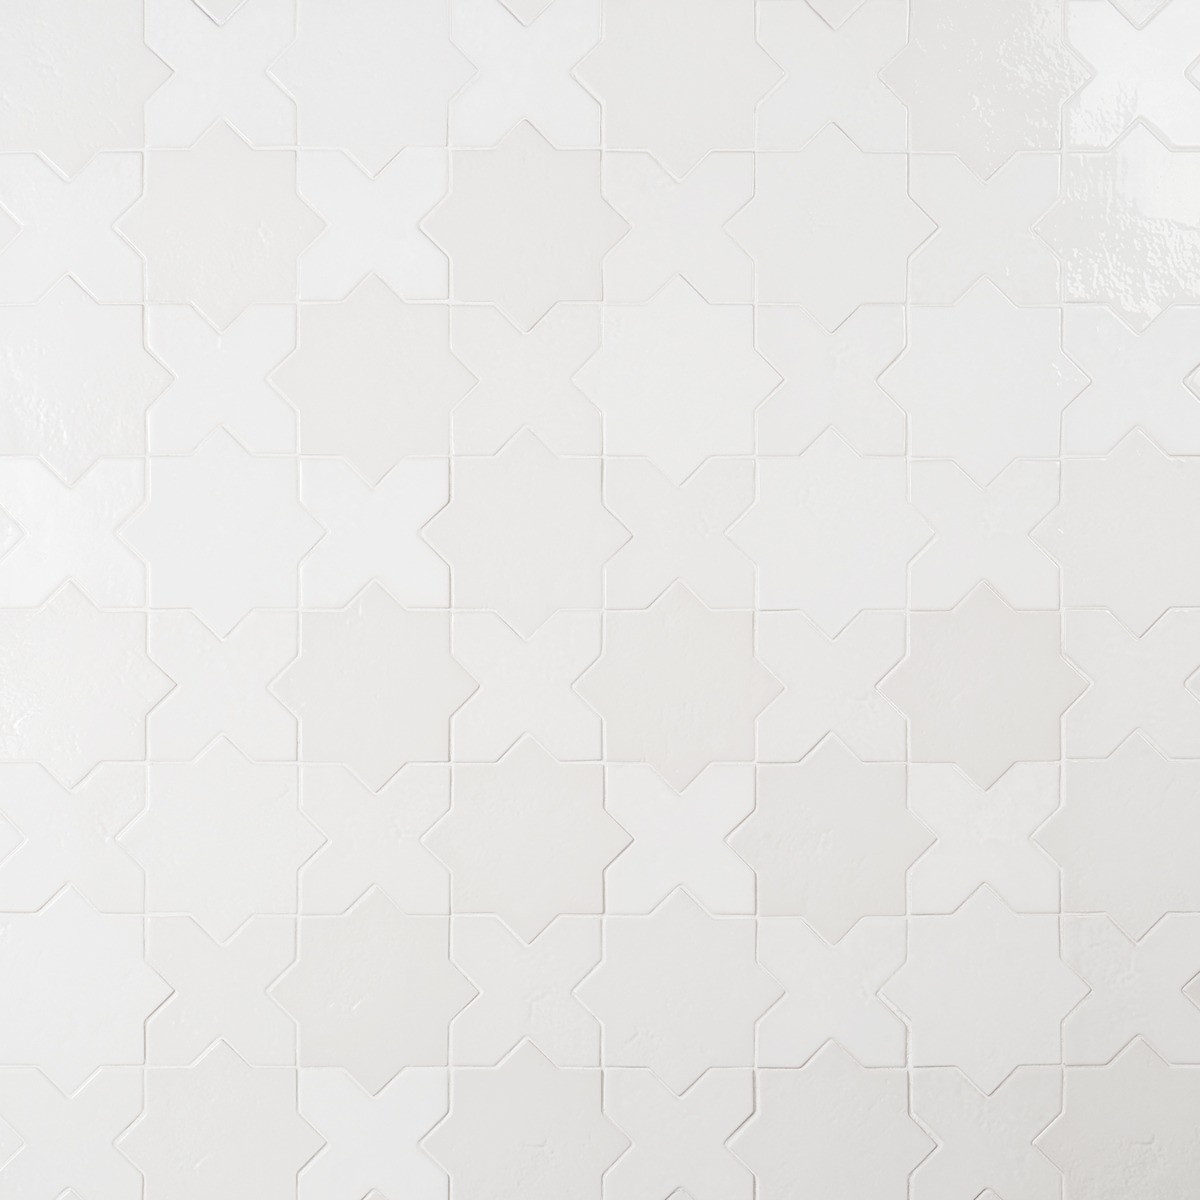 Not for Sale-Parma White Polished Star and White Polished Cross 6" Terracotta Look Porcelain Tile